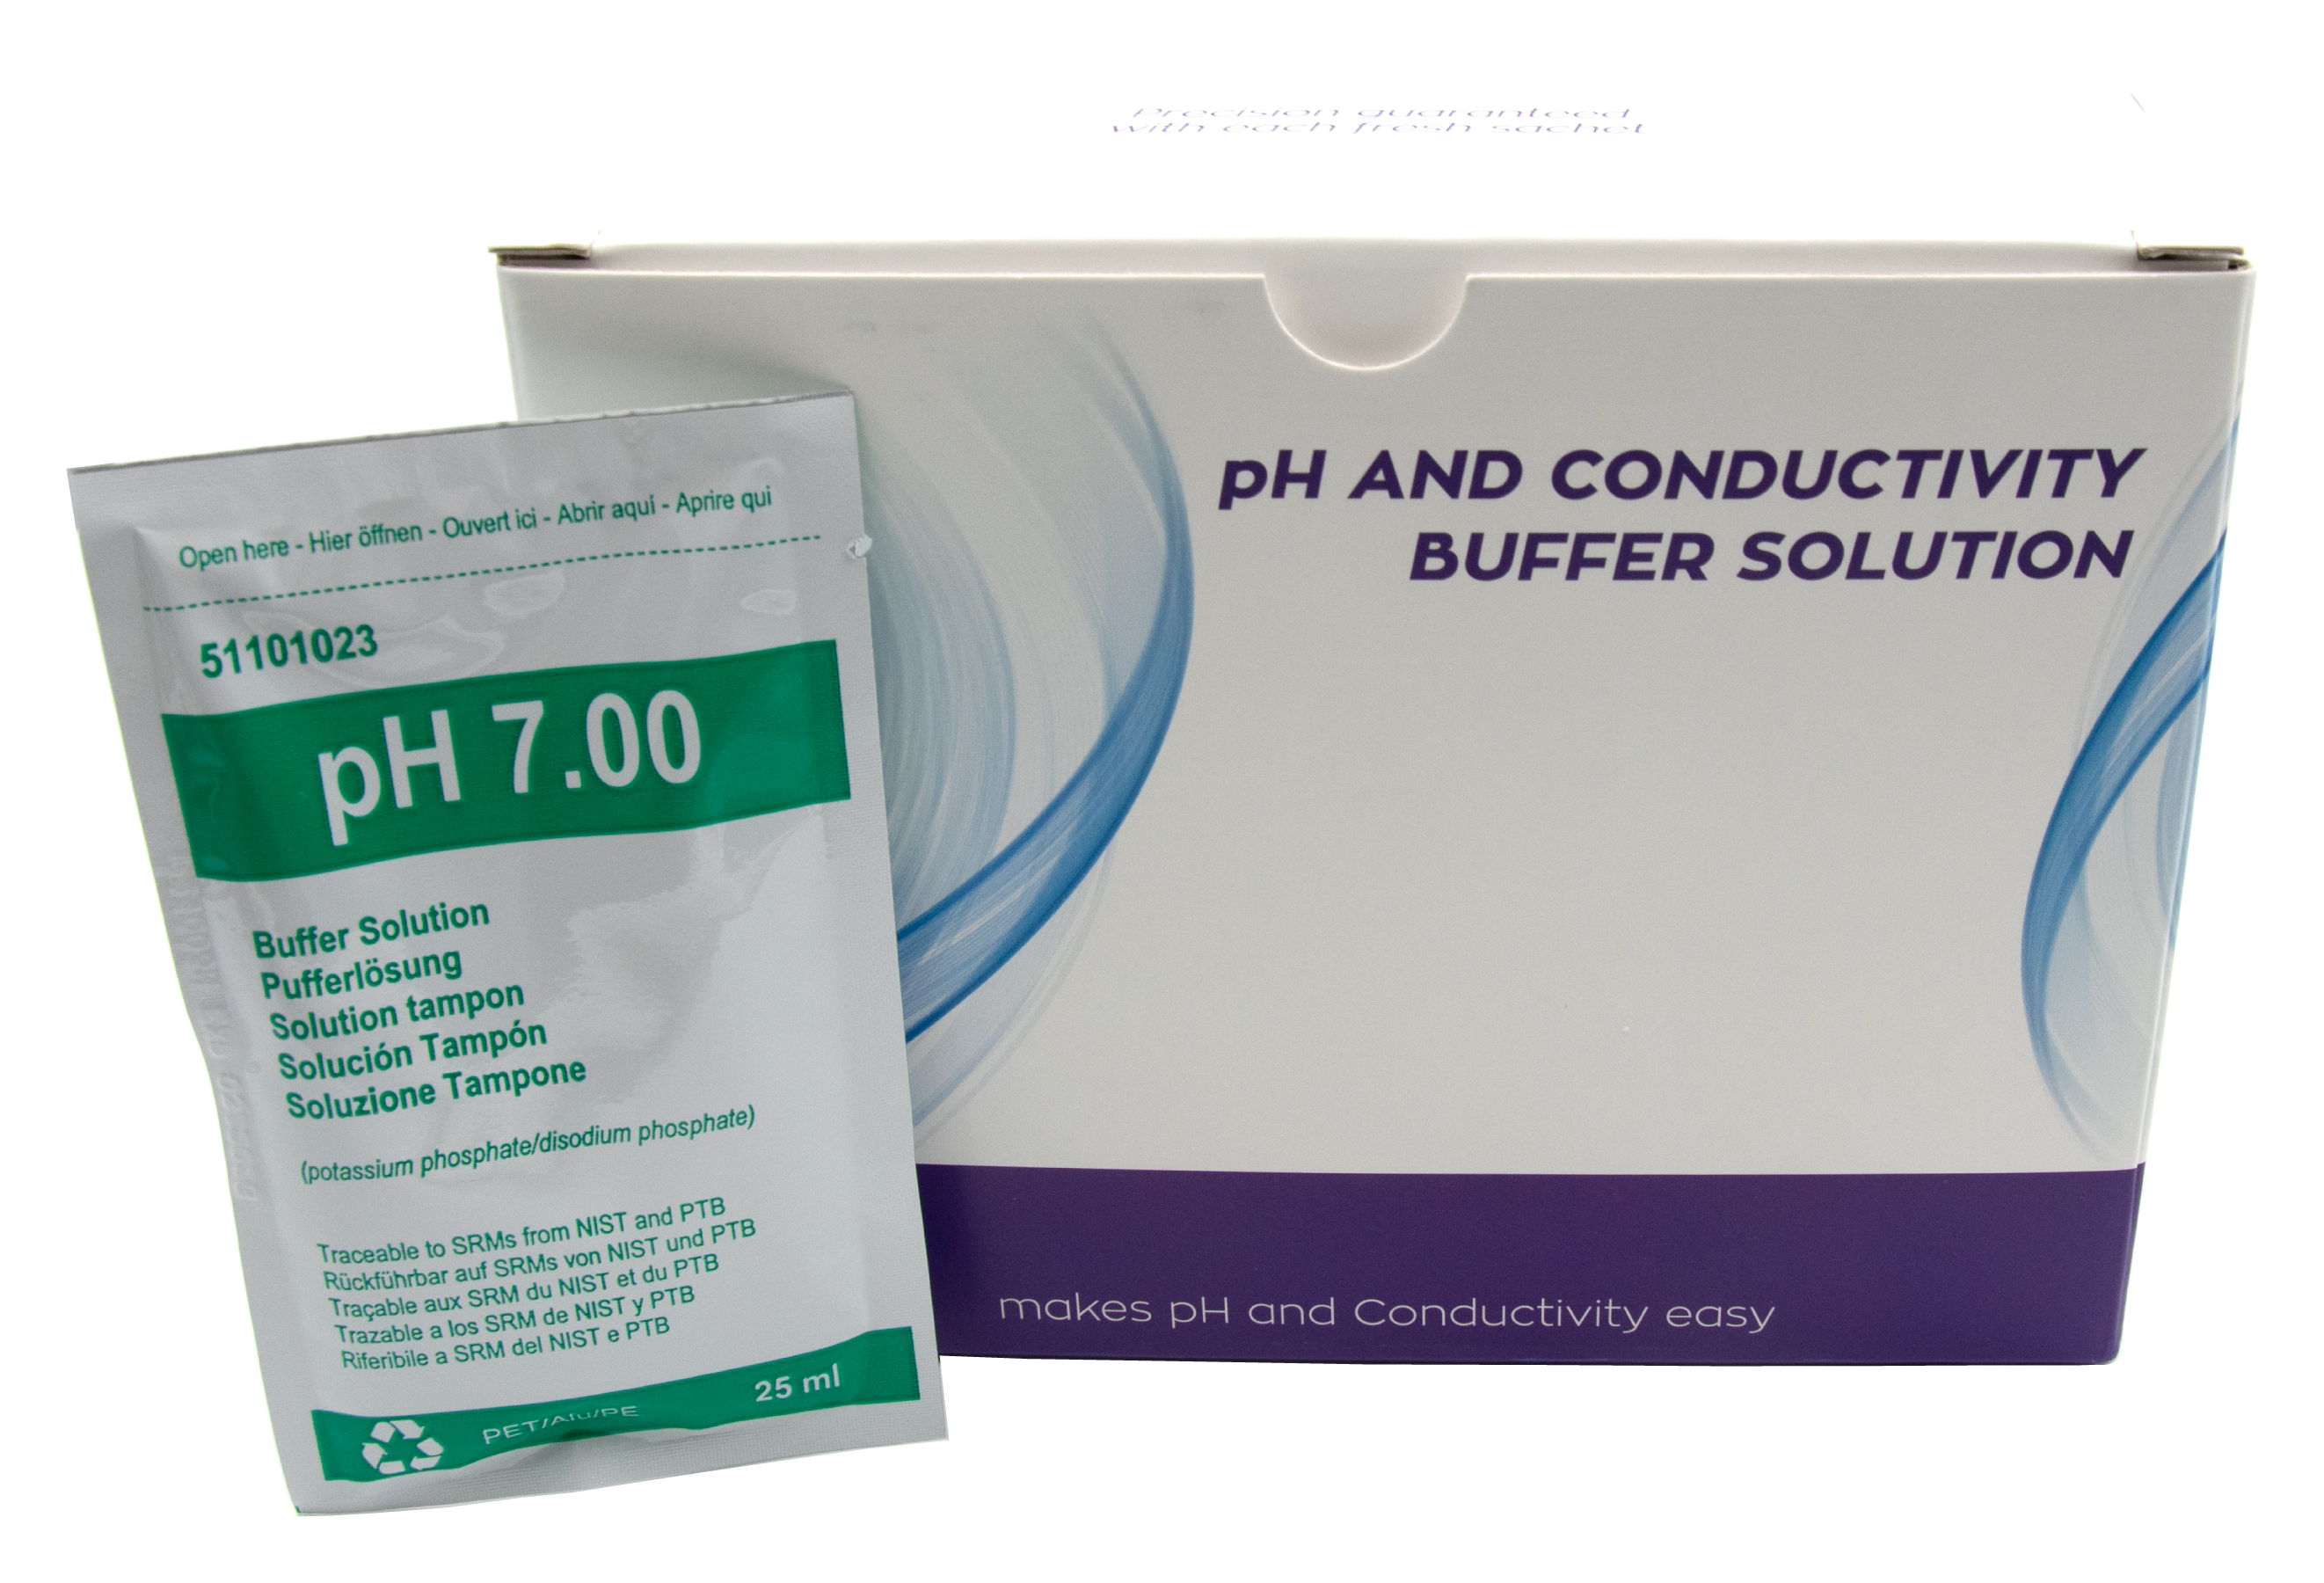 XS BASIC pH 7.00 (25°C) Buffer solution pack with 20 sachets of 25ml, green, with certificate of analysis